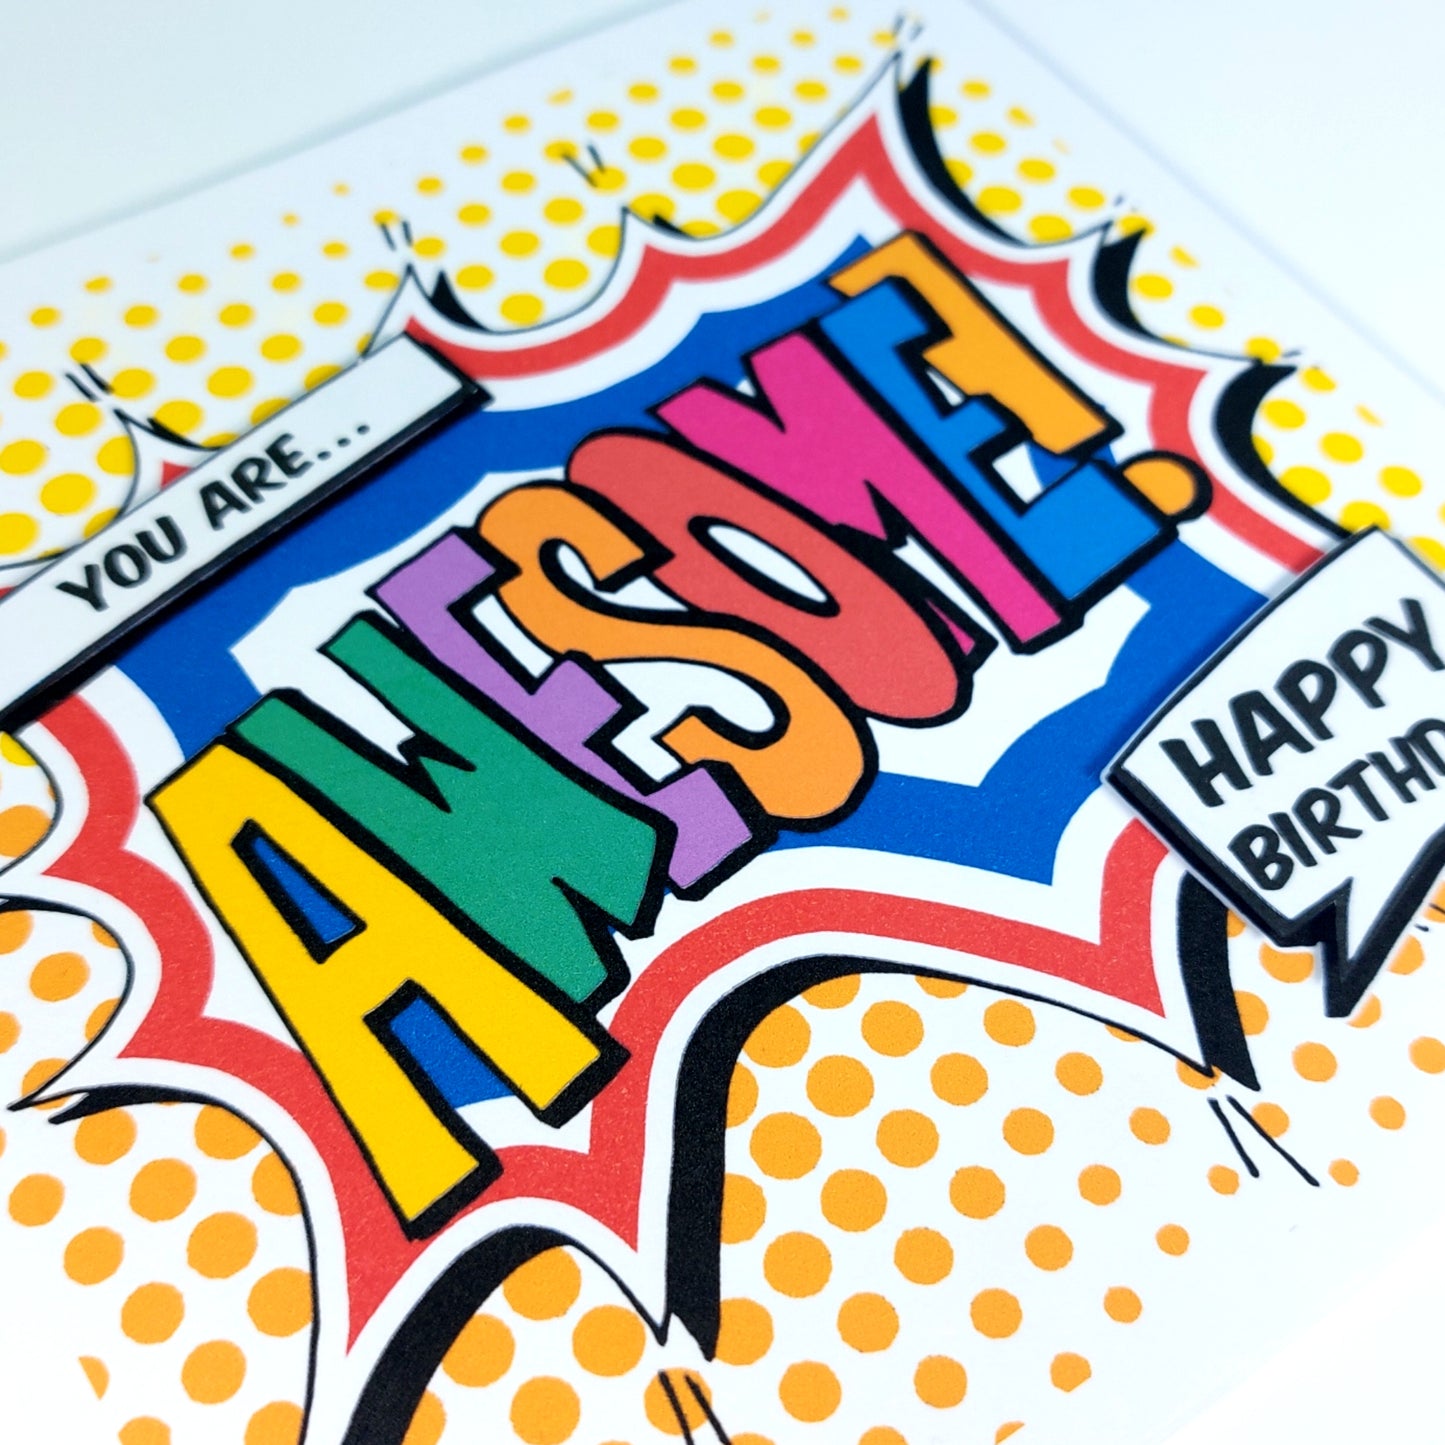 You are Awesome Birthday Card